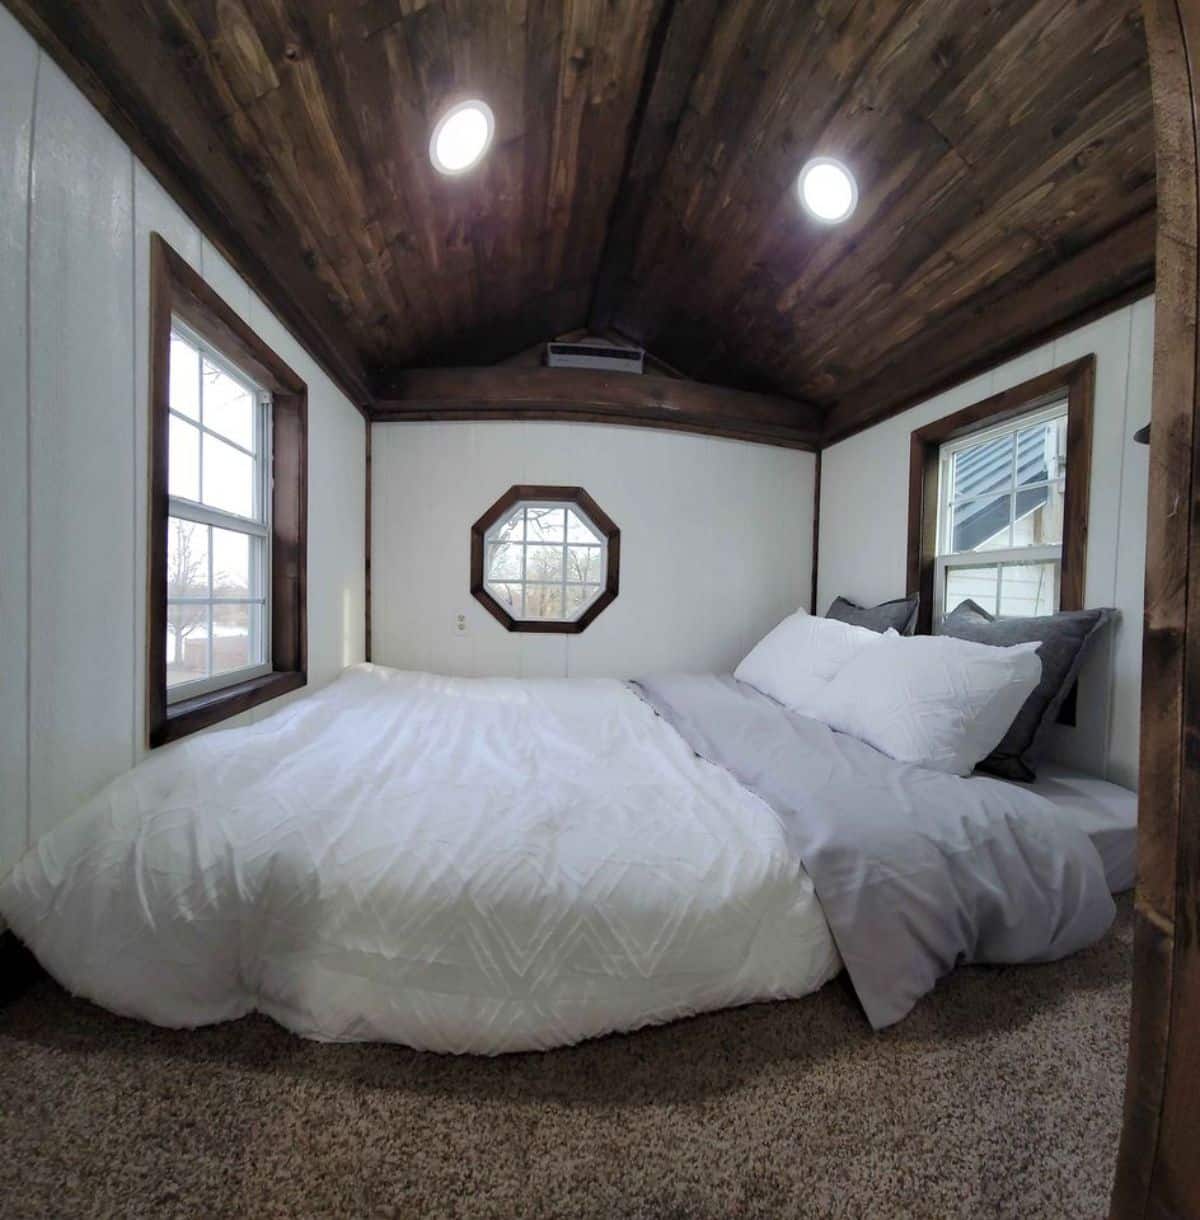 Loft bedroom has a stunning comfortable bed with huge windows and an ample space